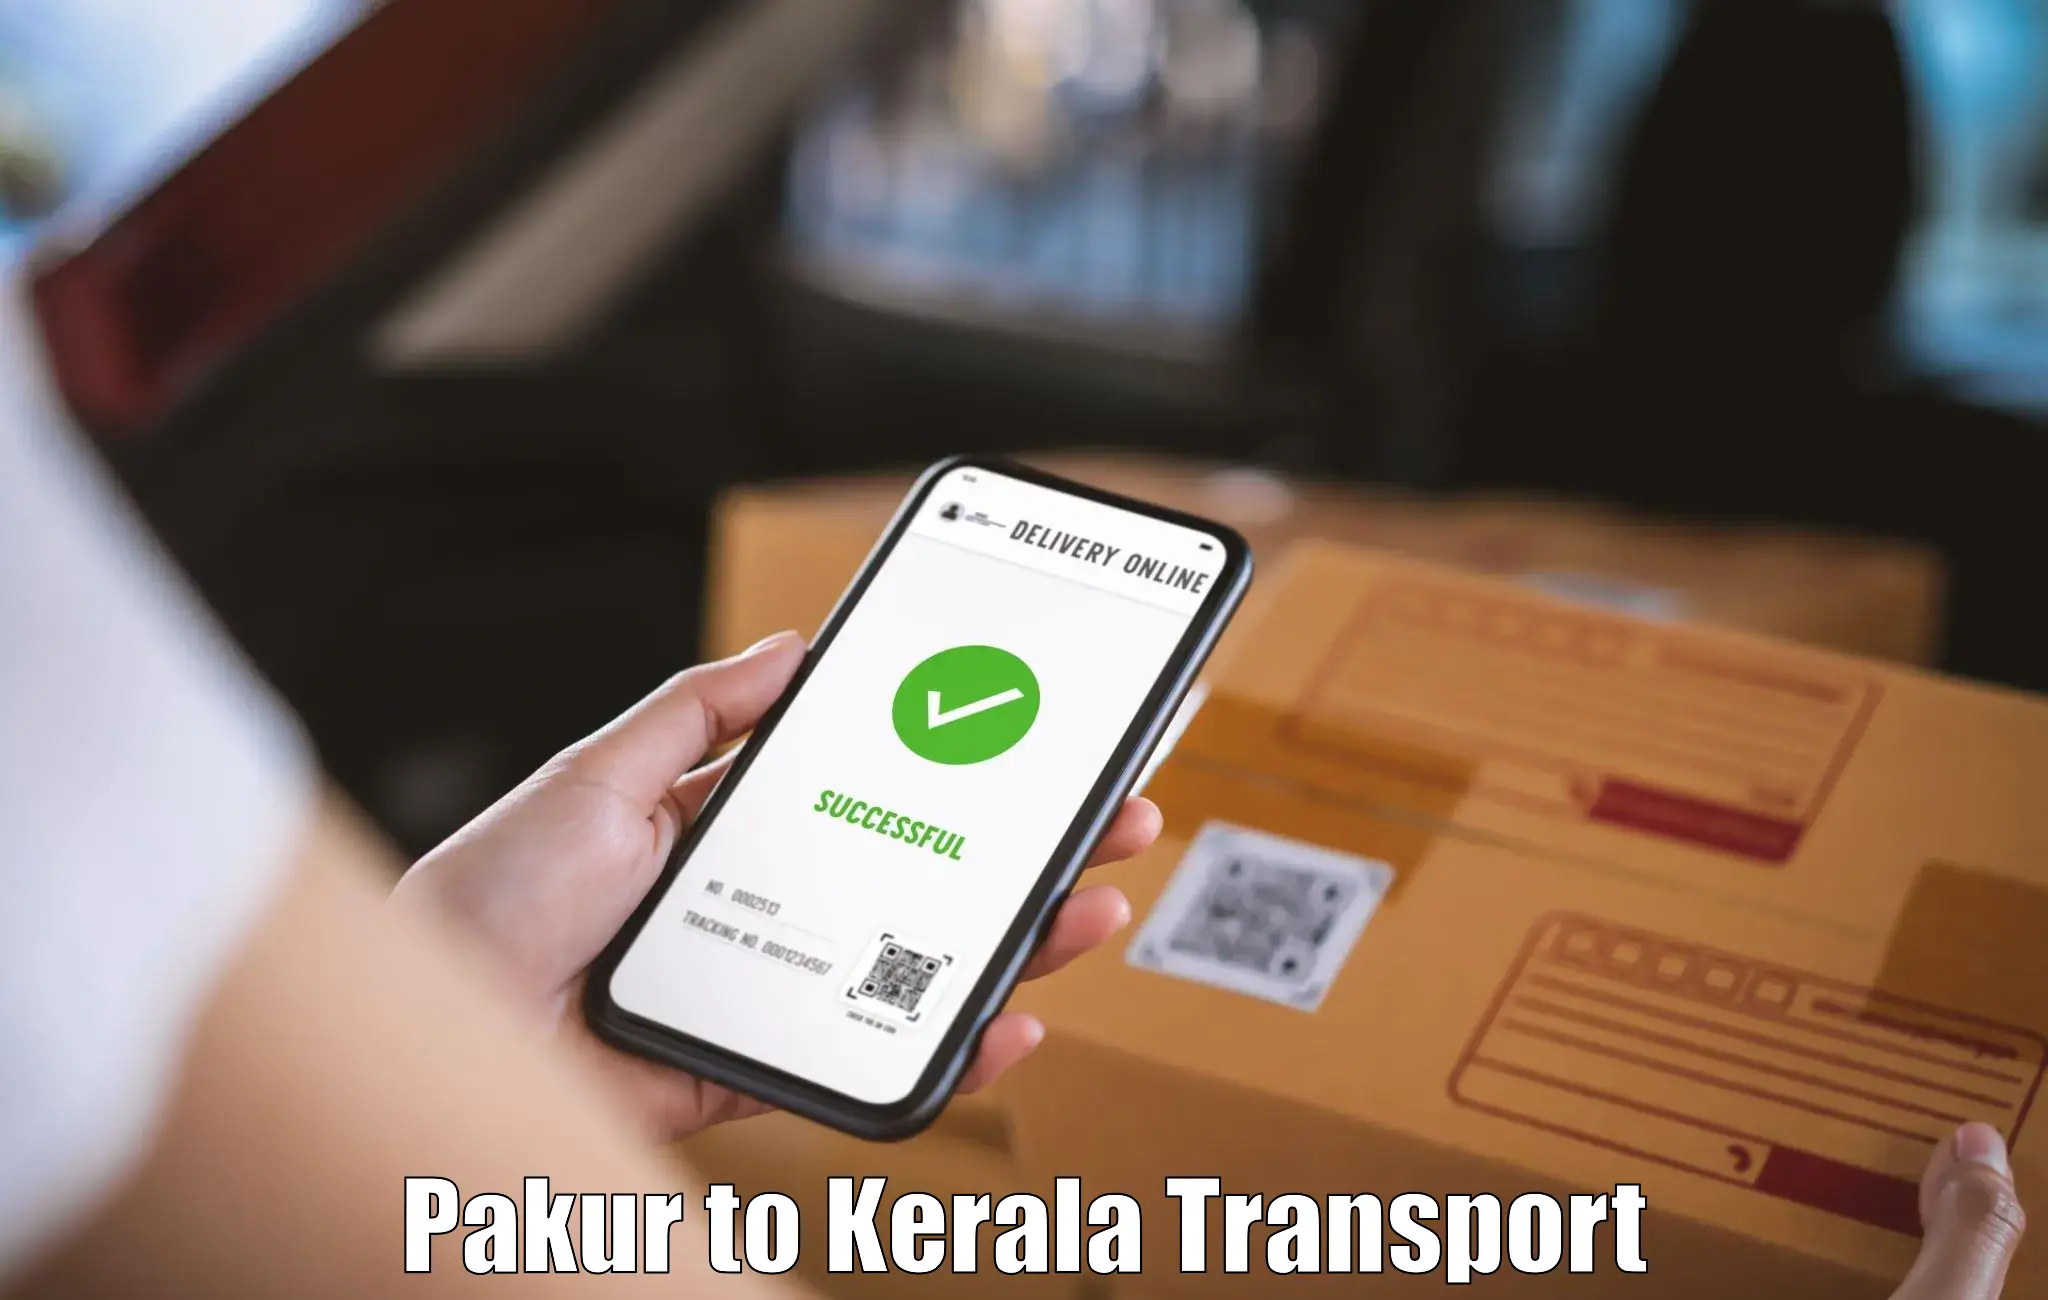 Truck transport companies in India Pakur to Calicut